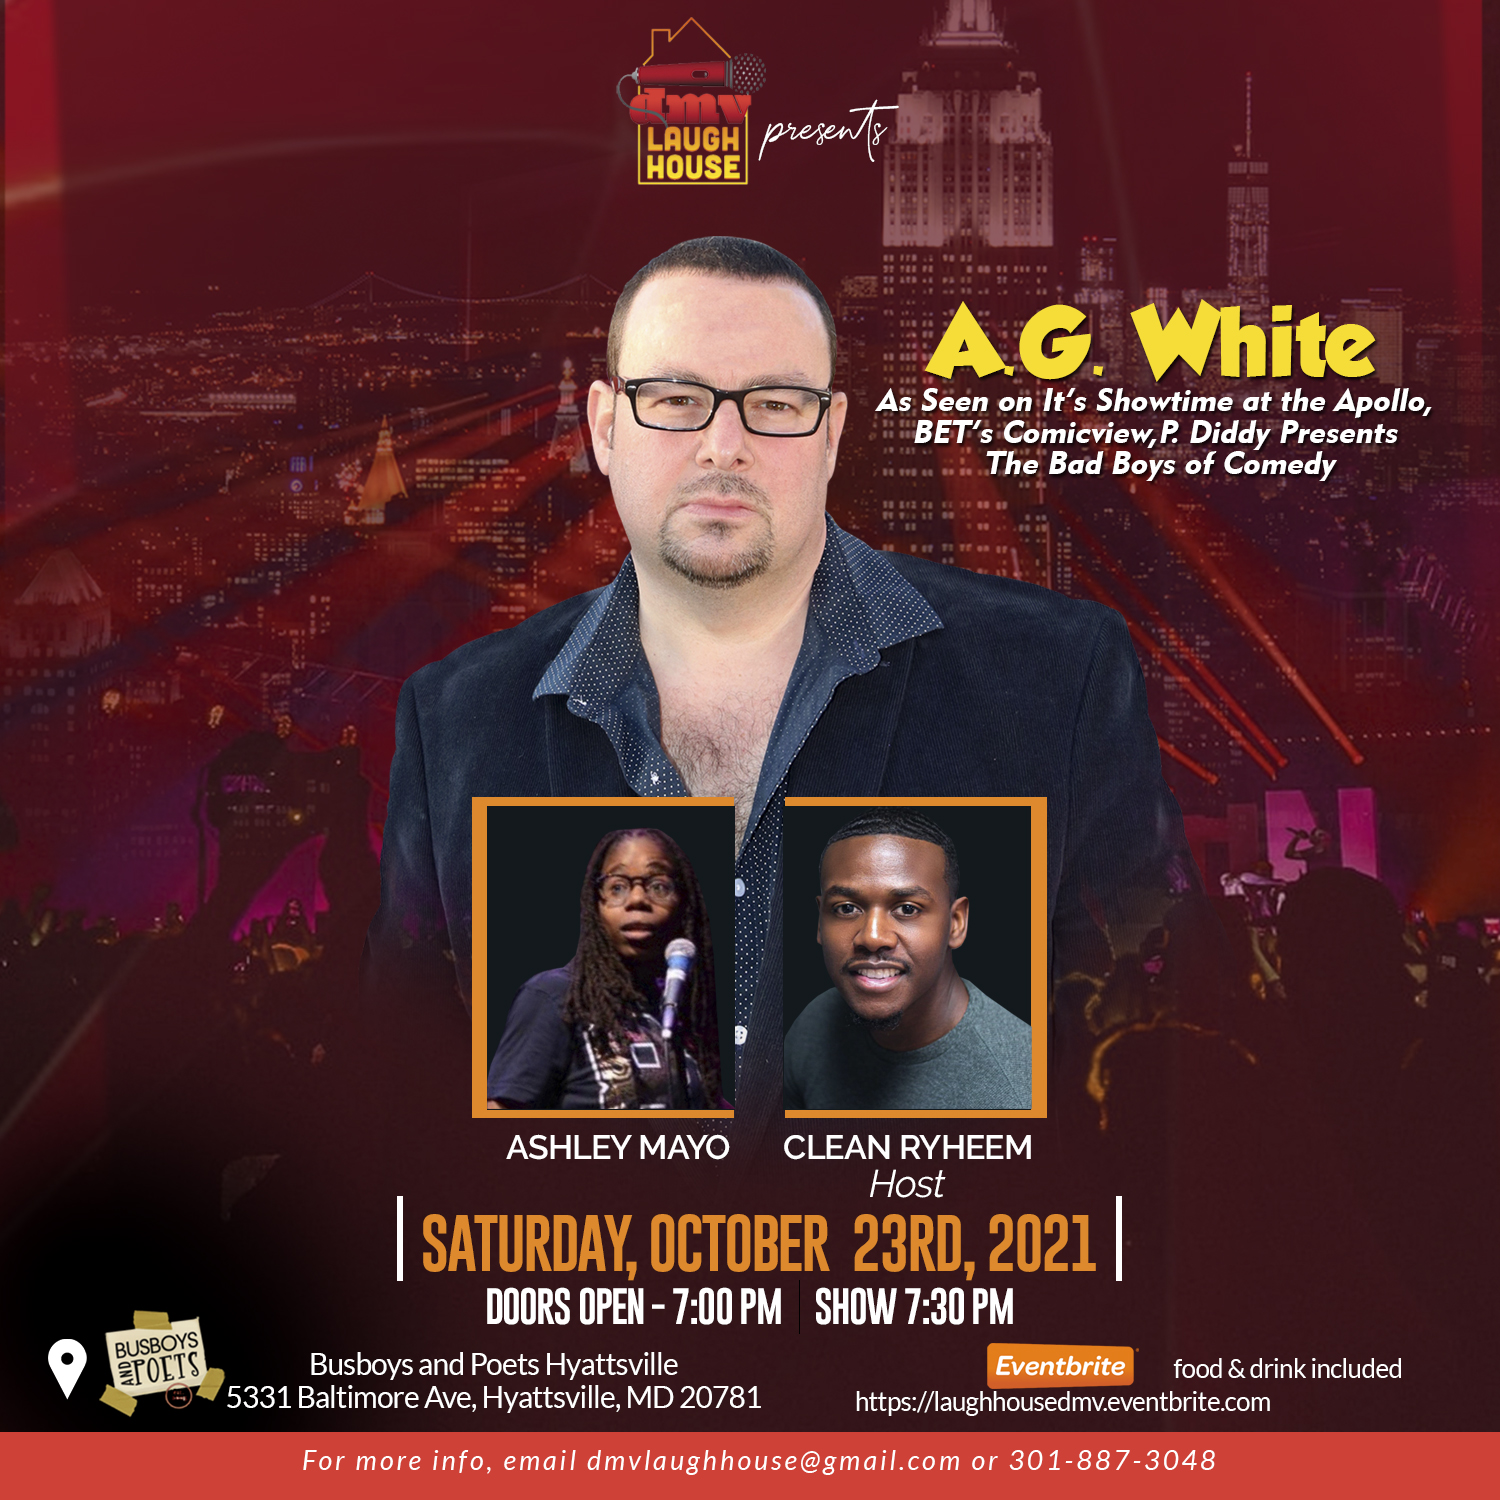 Laugh House Comedy presents A.G. White